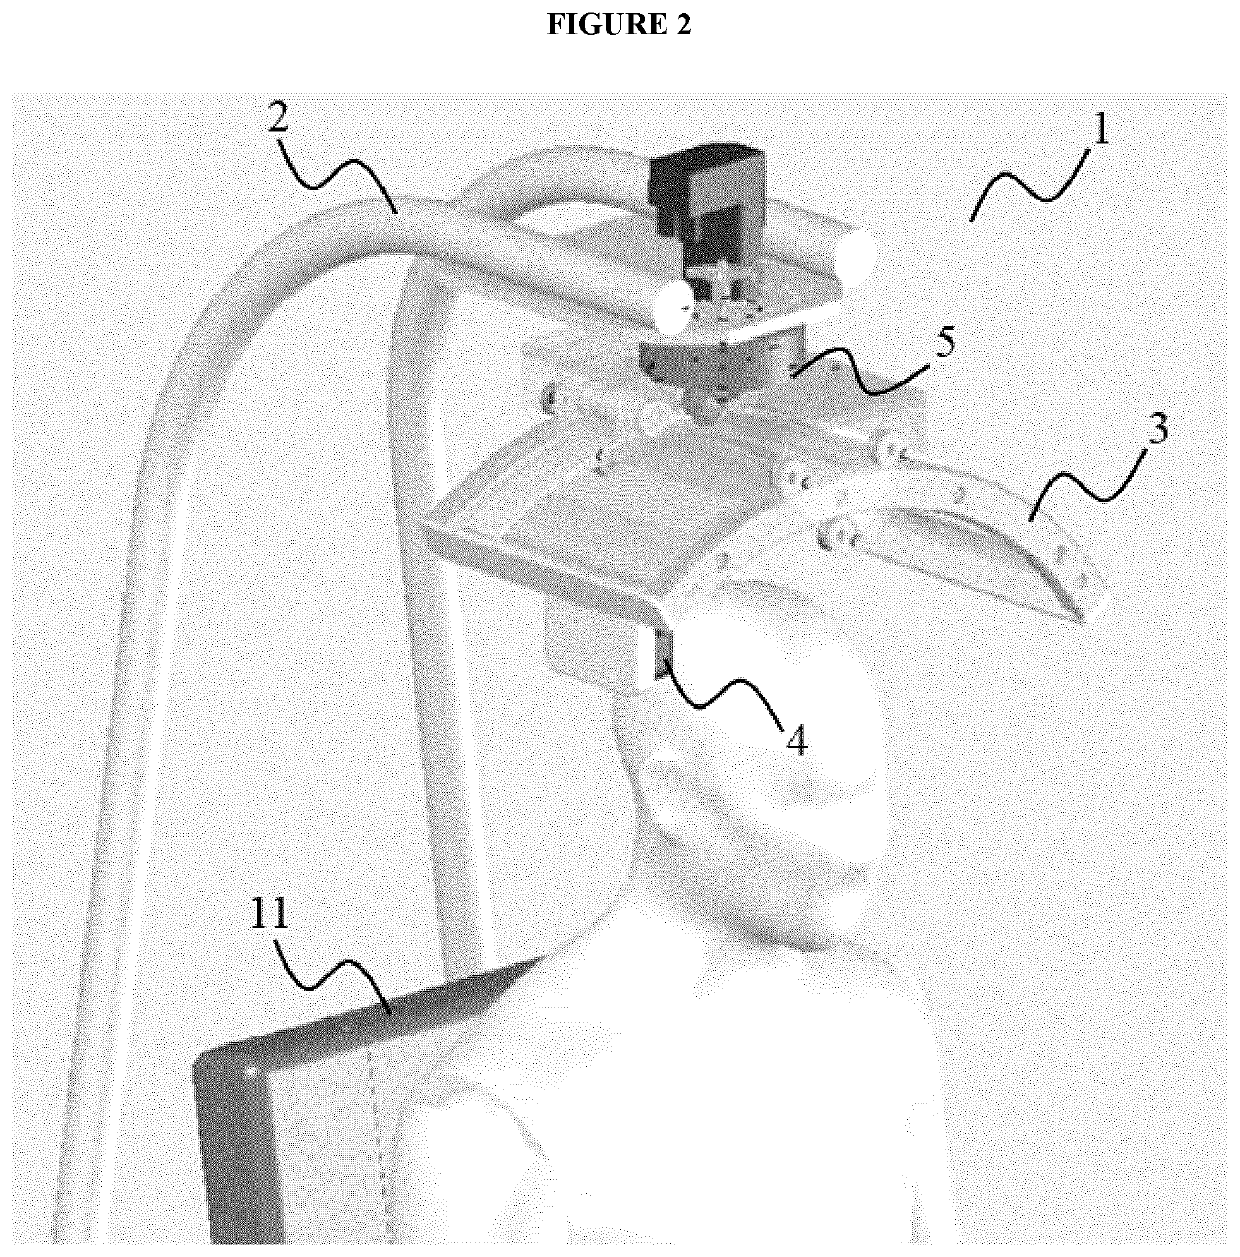 Devices and methods for exercise or analysis of the neck region